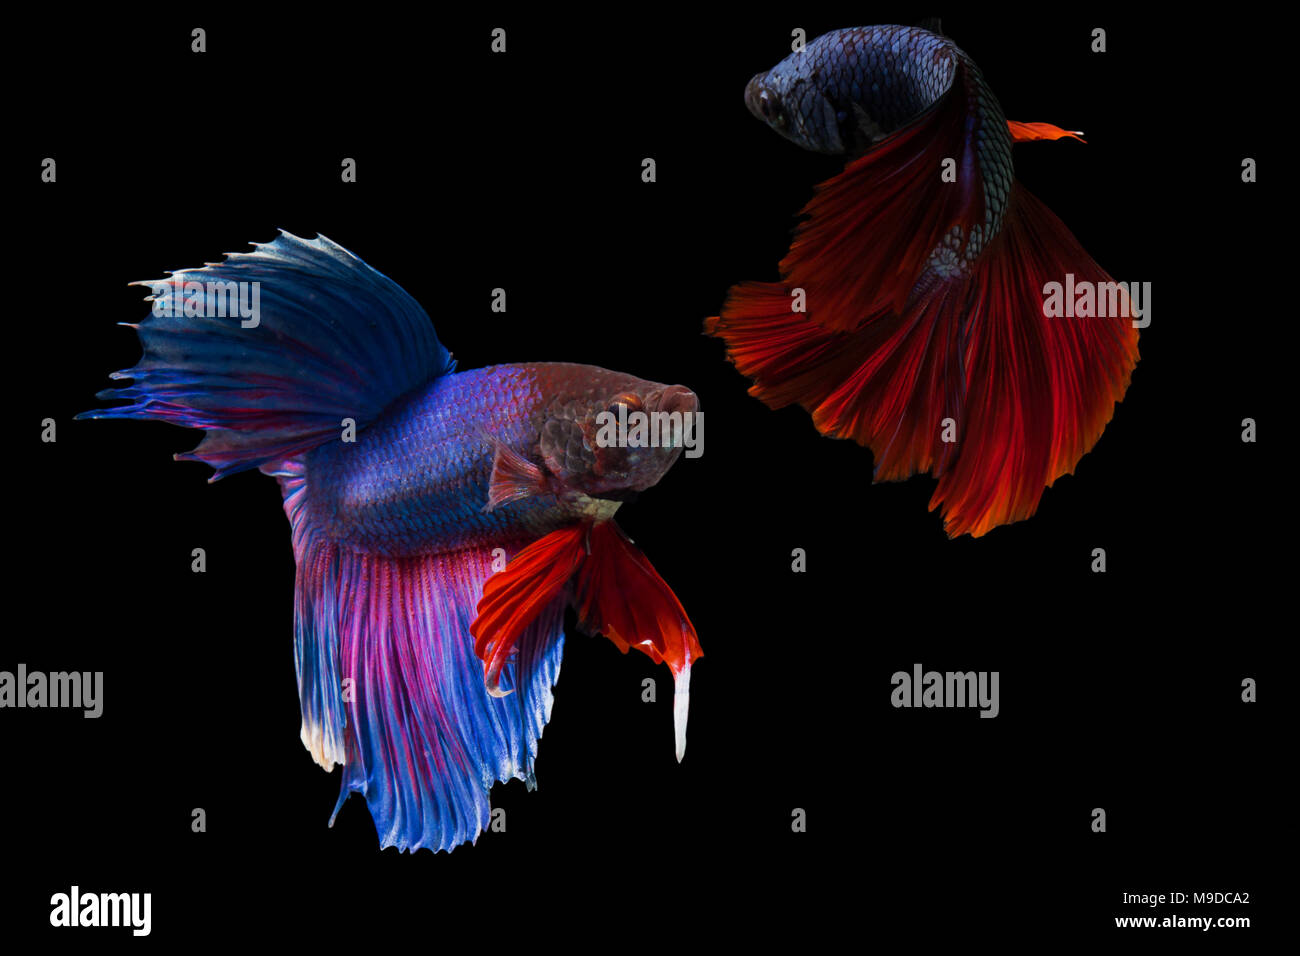 Siamese fighting fish,Half Moon long red tail(HMPK)fighting with blue long tail,Betta splendens isolated on black background. Stock Photo